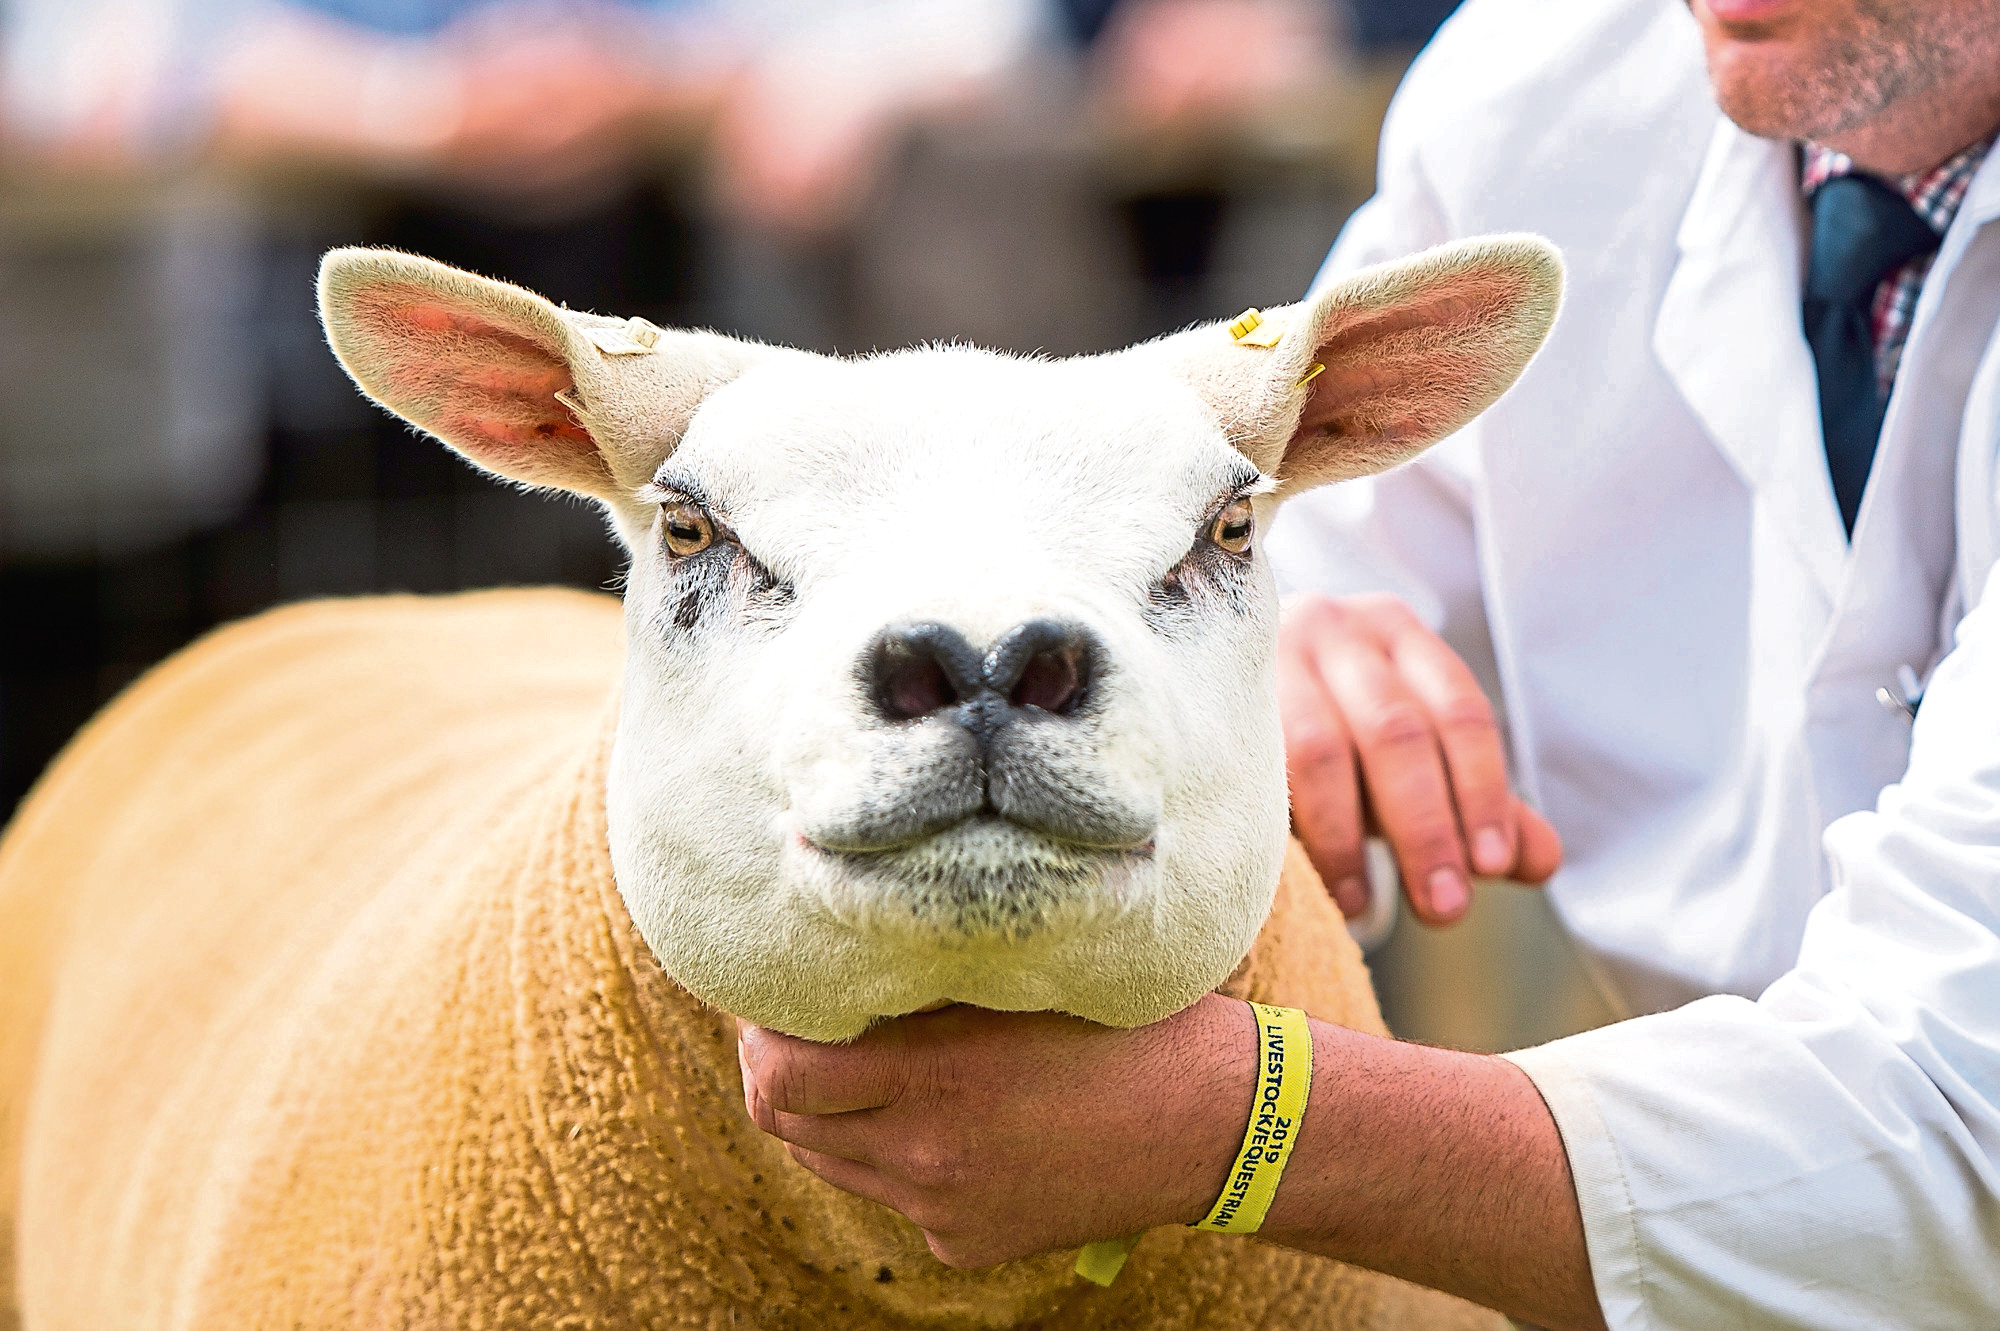 The event will provide a platform for sheep breeders across Scotland to showcase their finest animals.